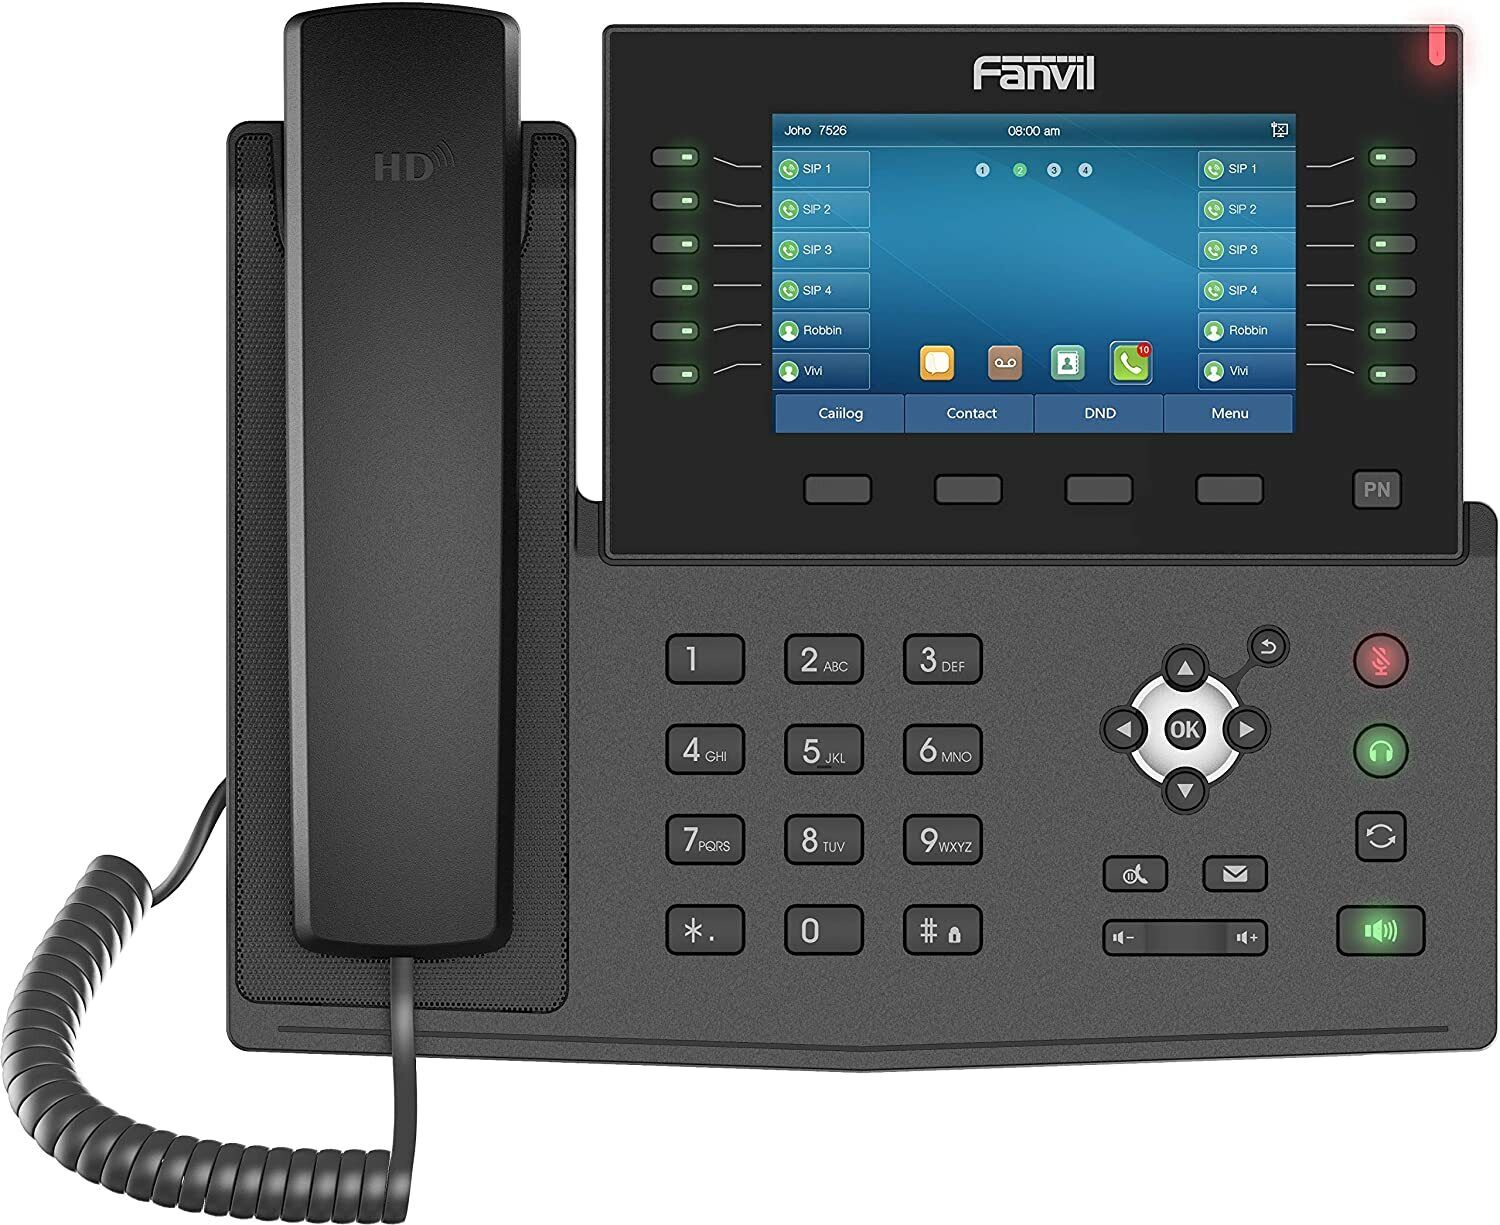 Fanvil X7C Executive level IP Phone - 20 SIP Lines w/ 5-inch Color Display